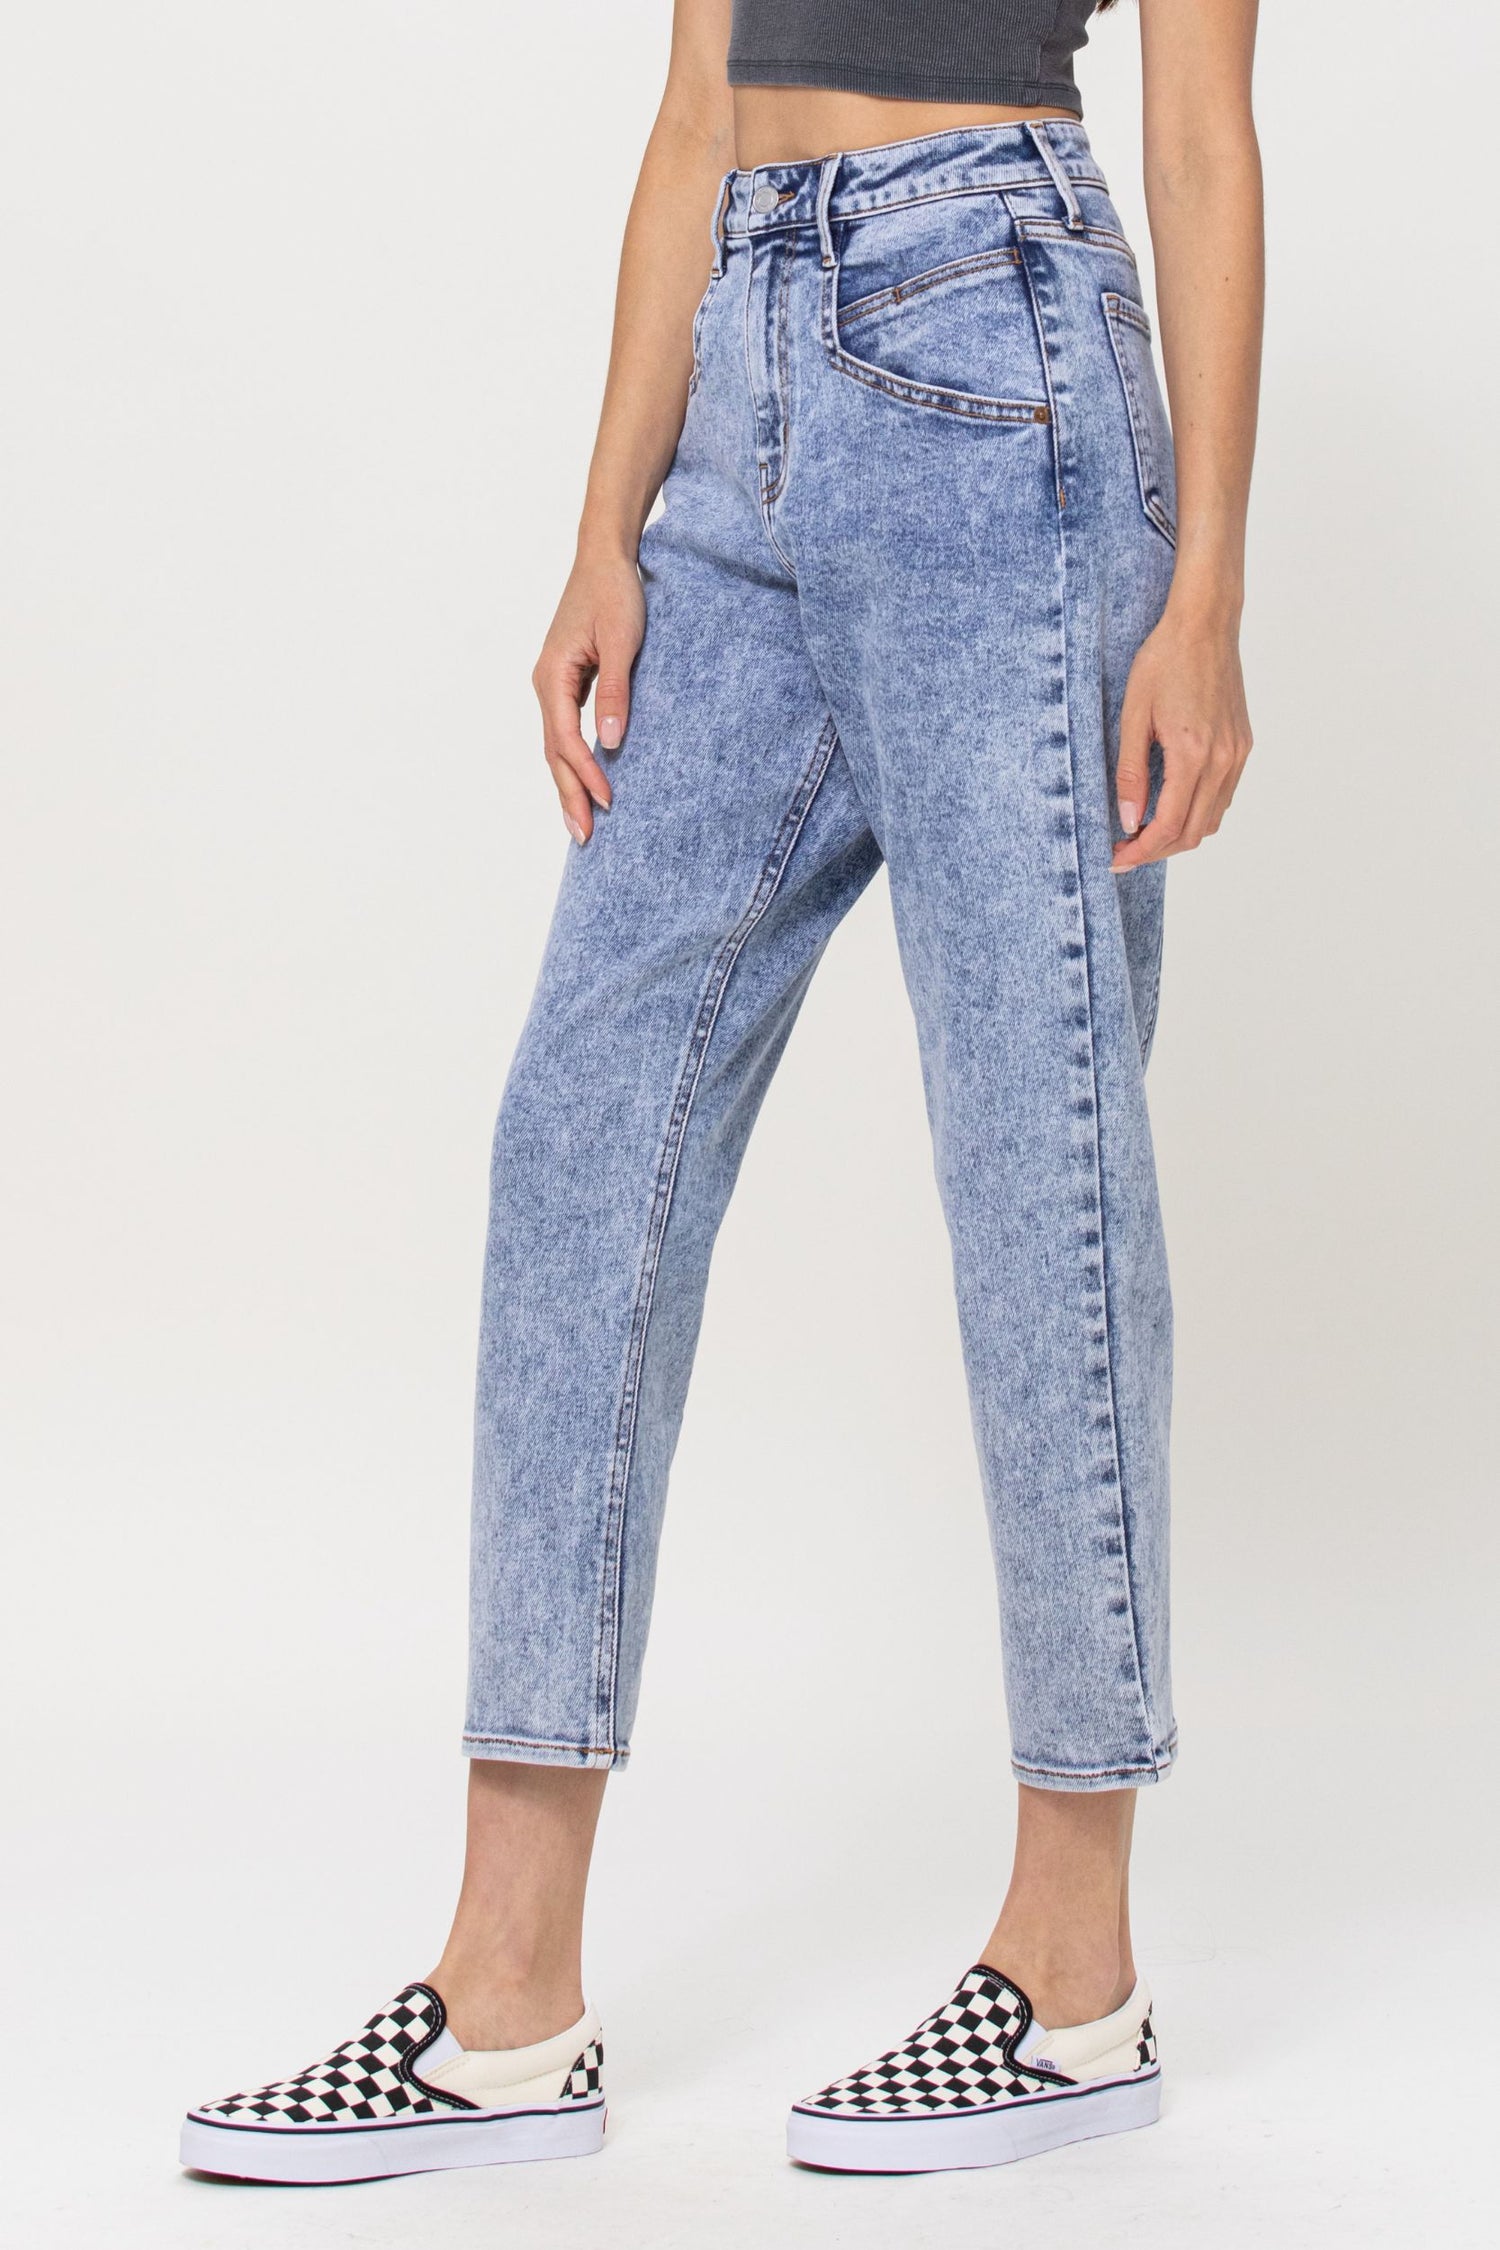 Cello Darcy Light Wash Detailed Mom Jean - Weeping Willow Boutique